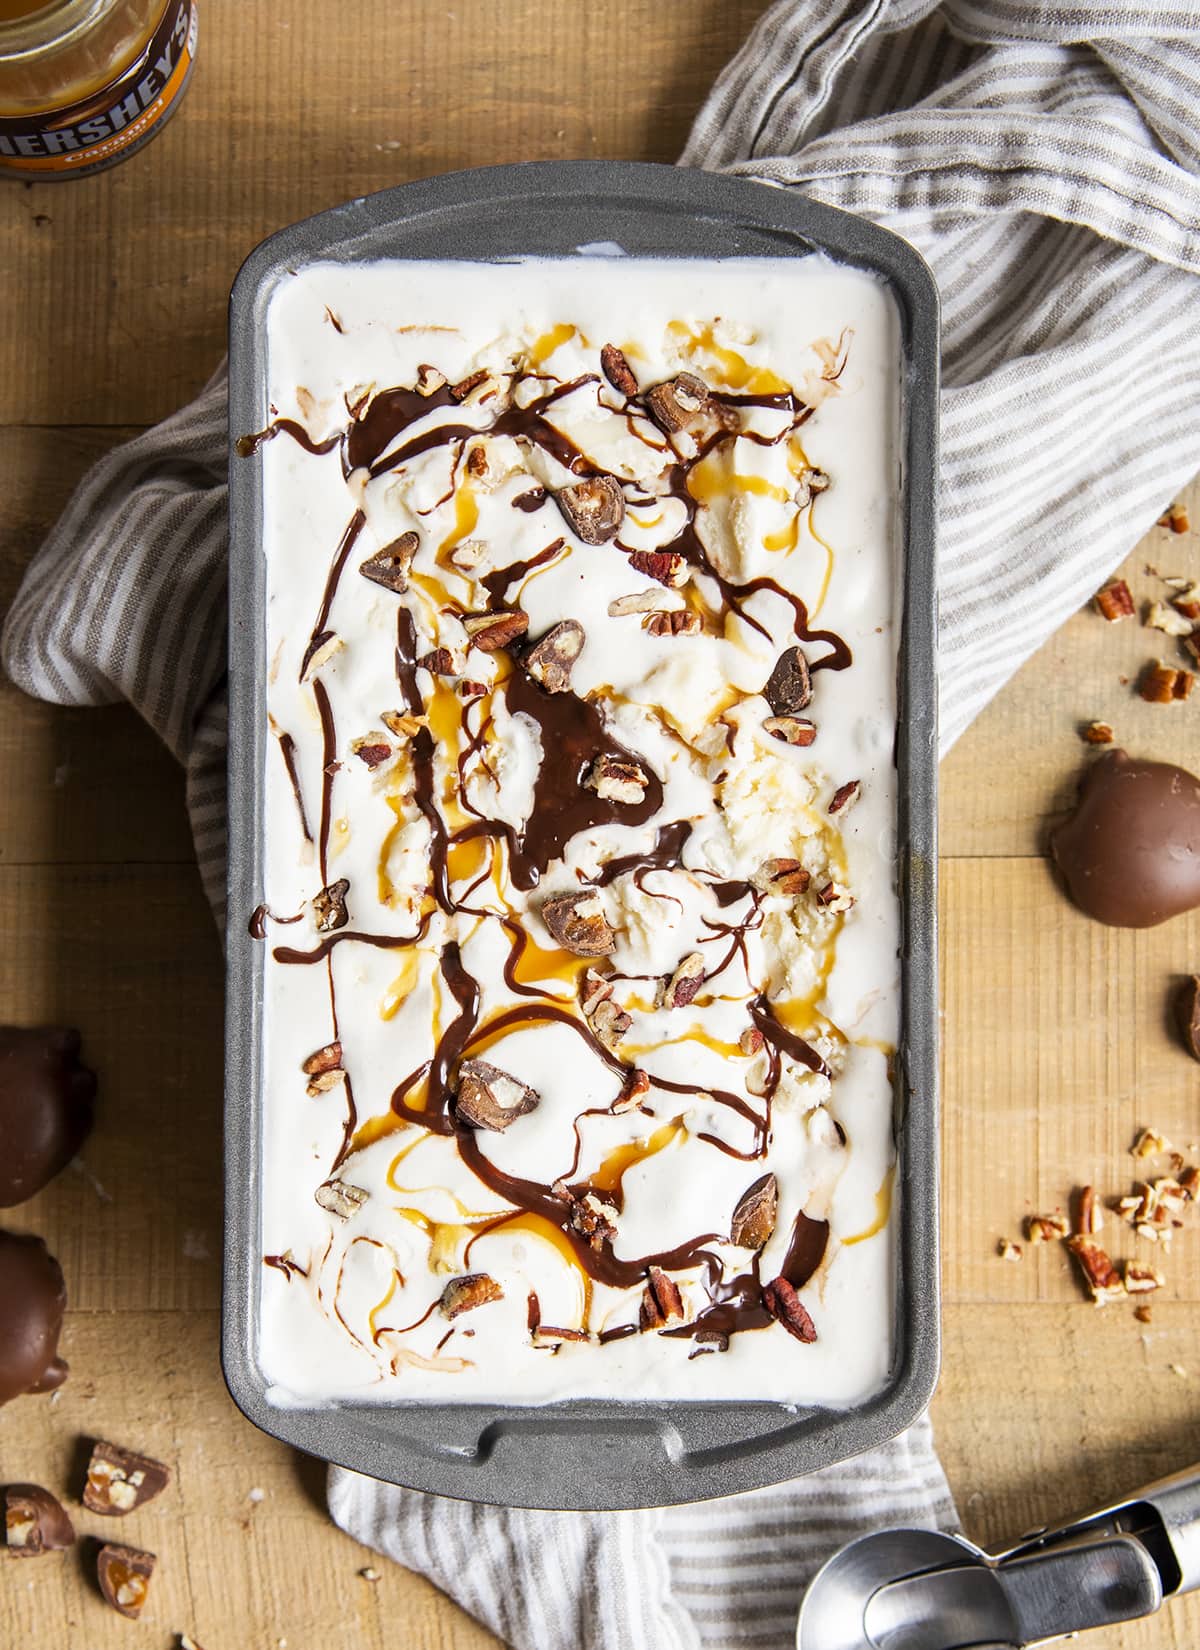 A metal container full of vanilla ice cream swirled with chocolate and caramel syrups.